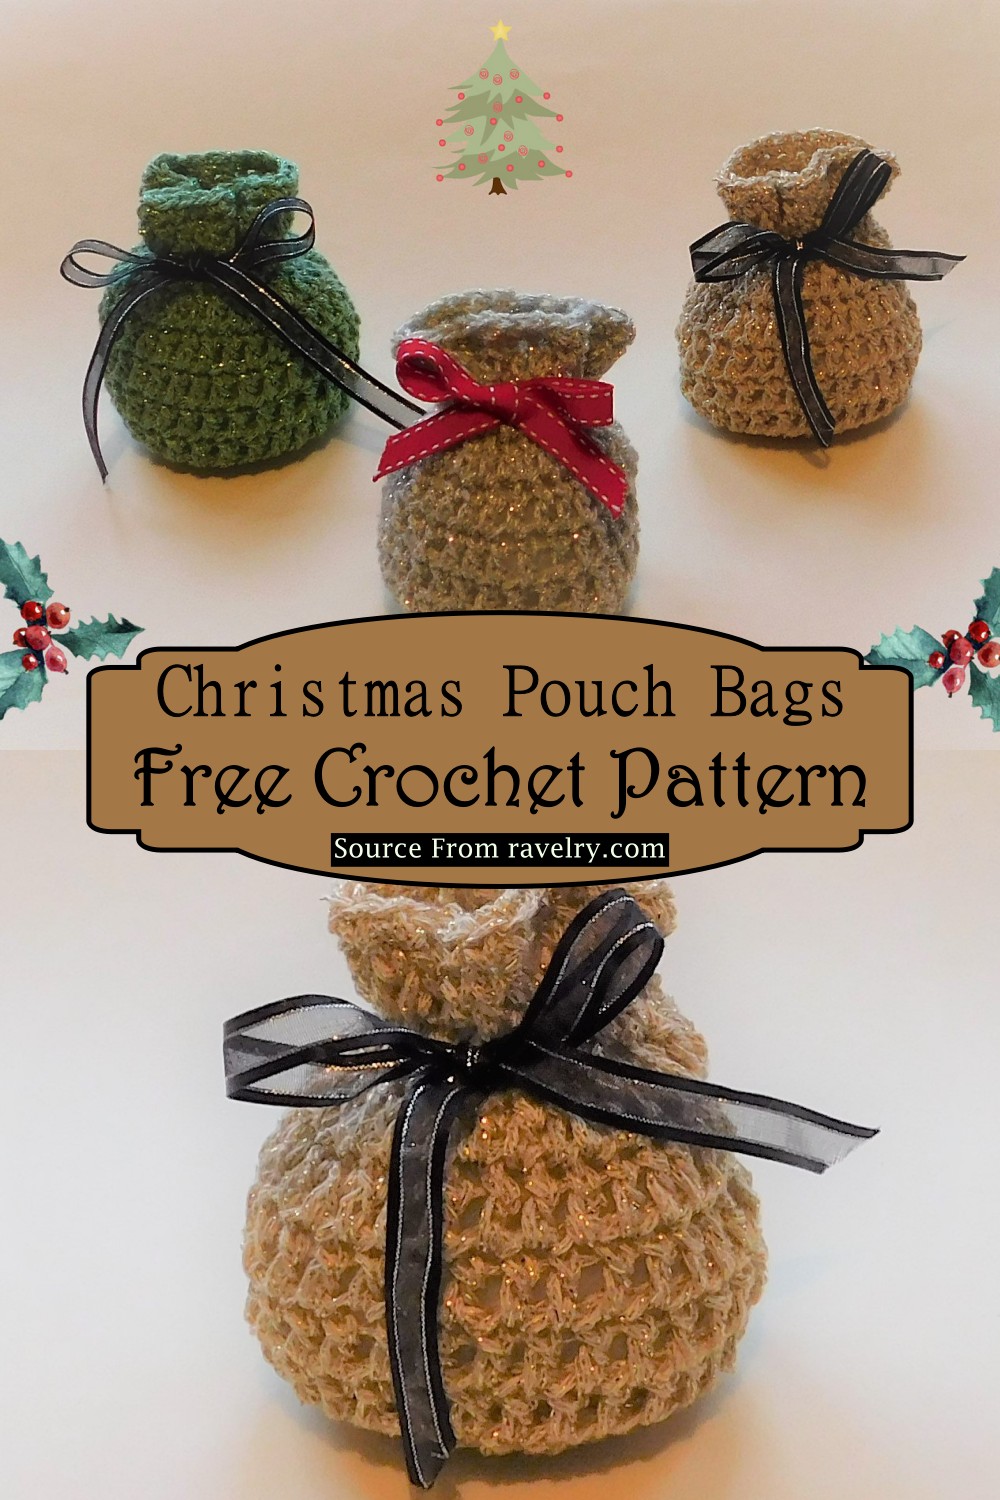 Crochet Christmas Pouch Bags Pattern